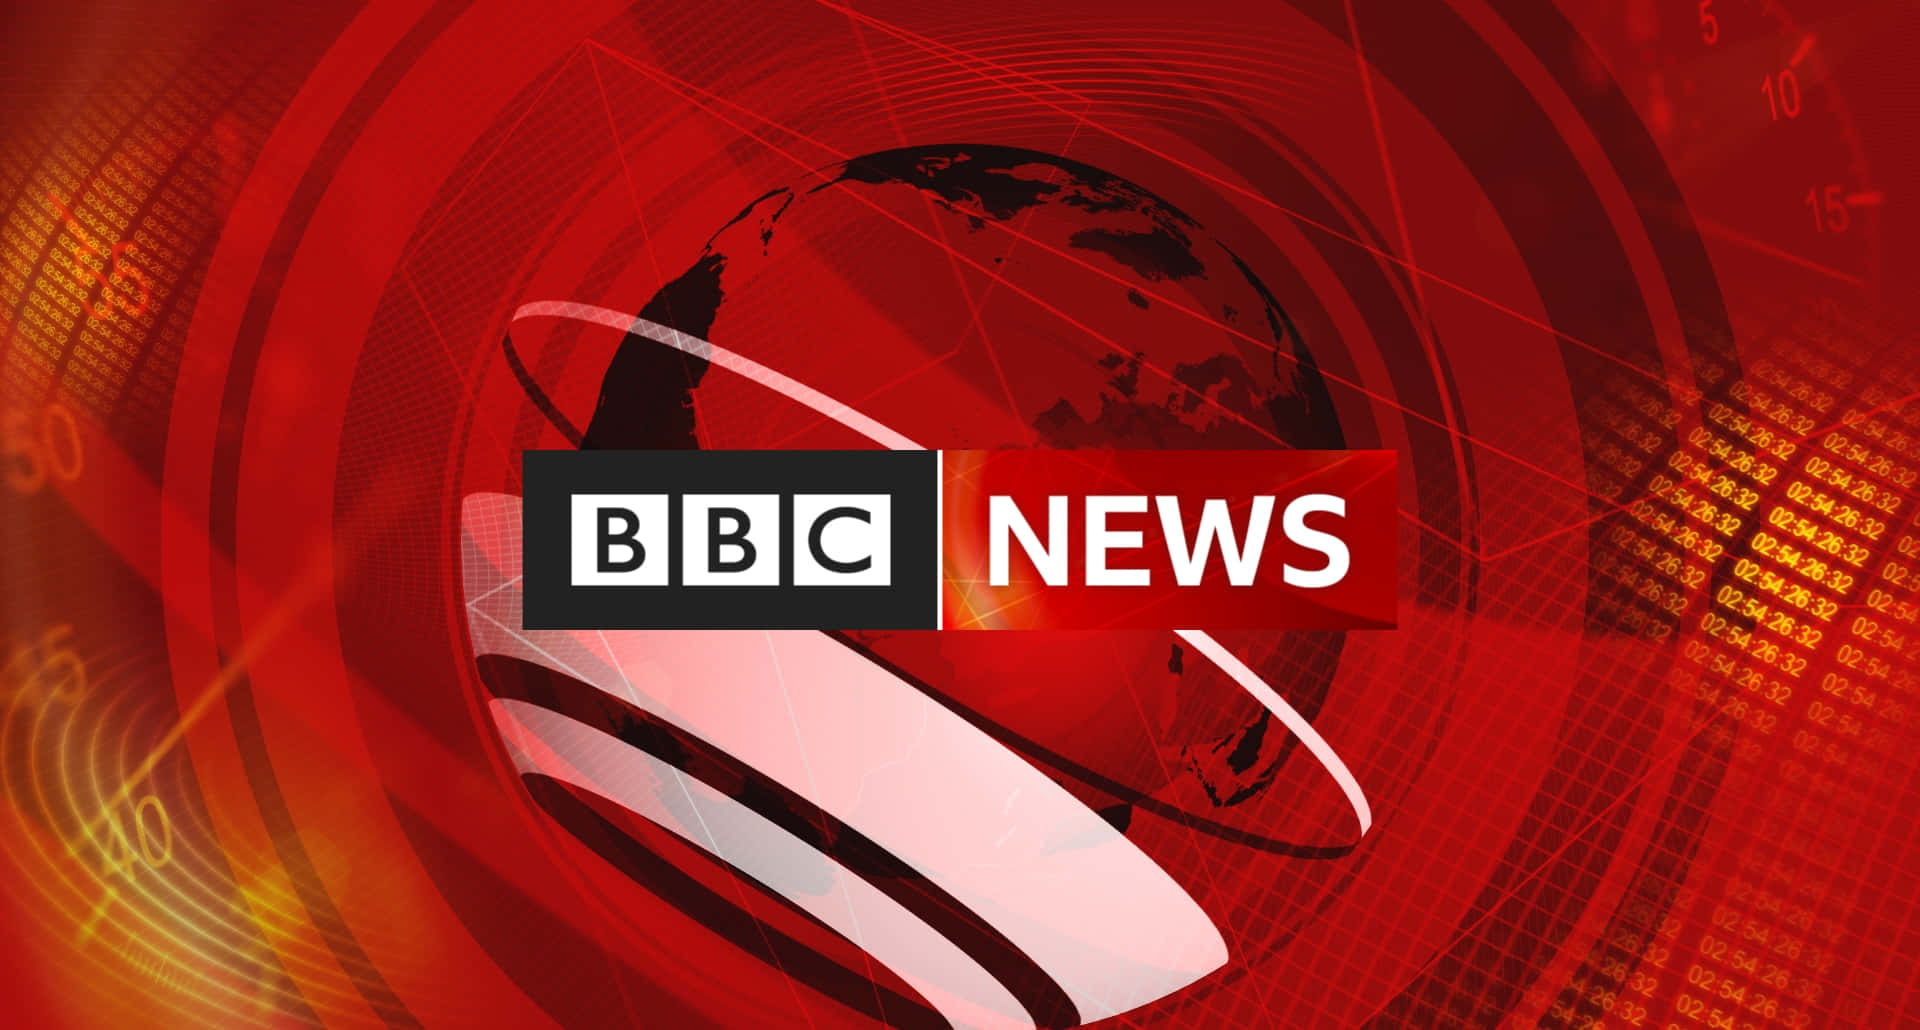 Keep Up with the Latest News from BBC